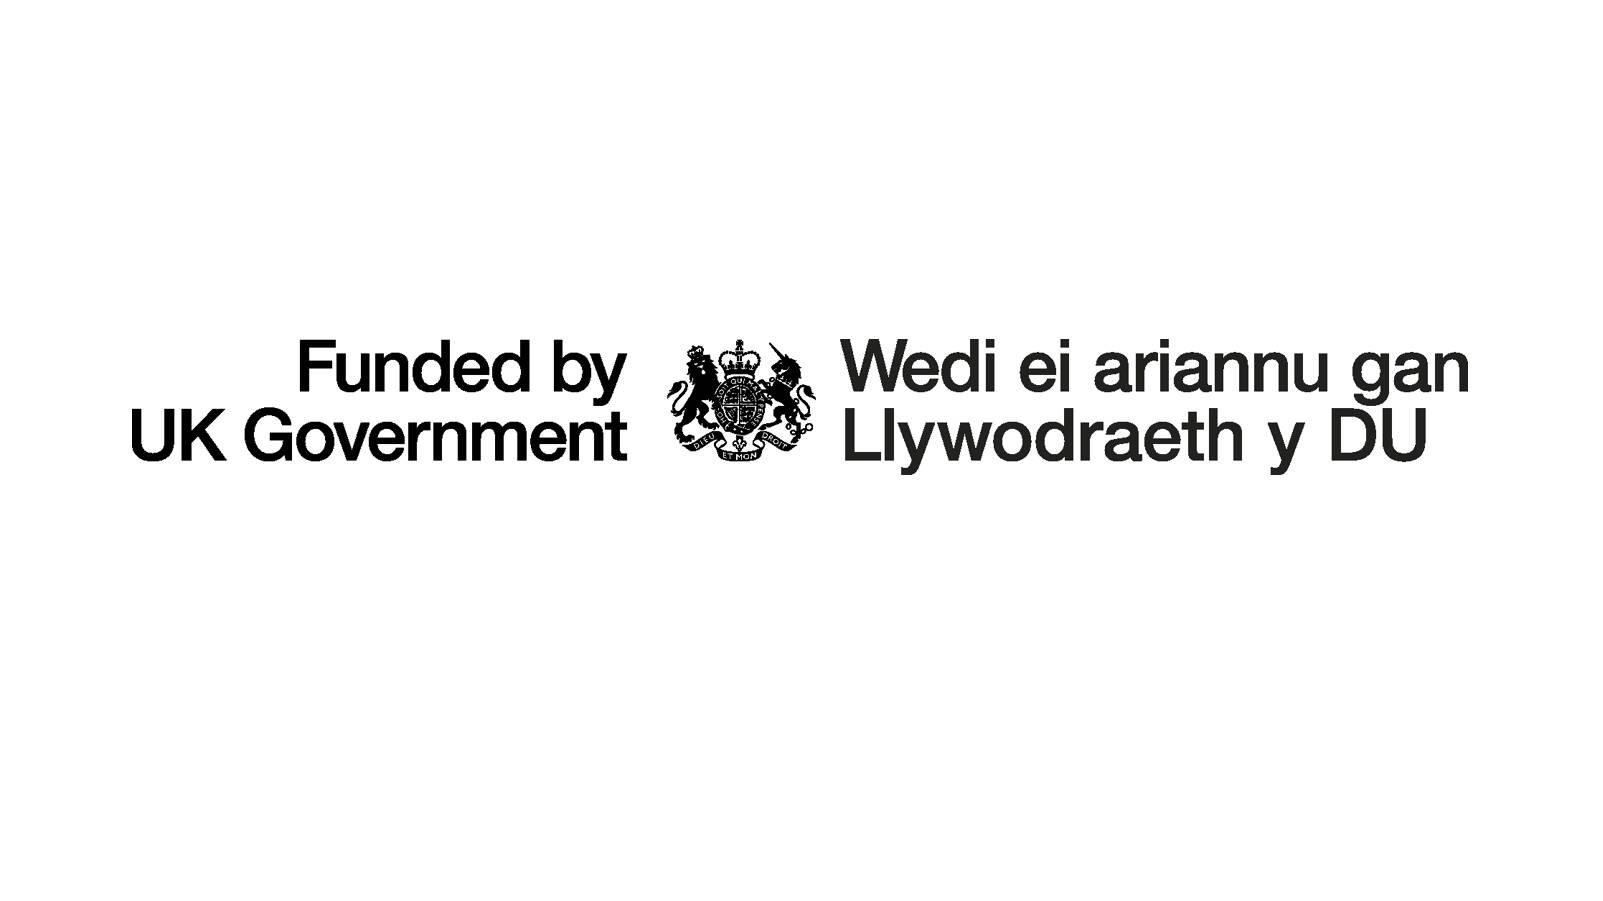 Funded by UK Government logo - English and Welsh